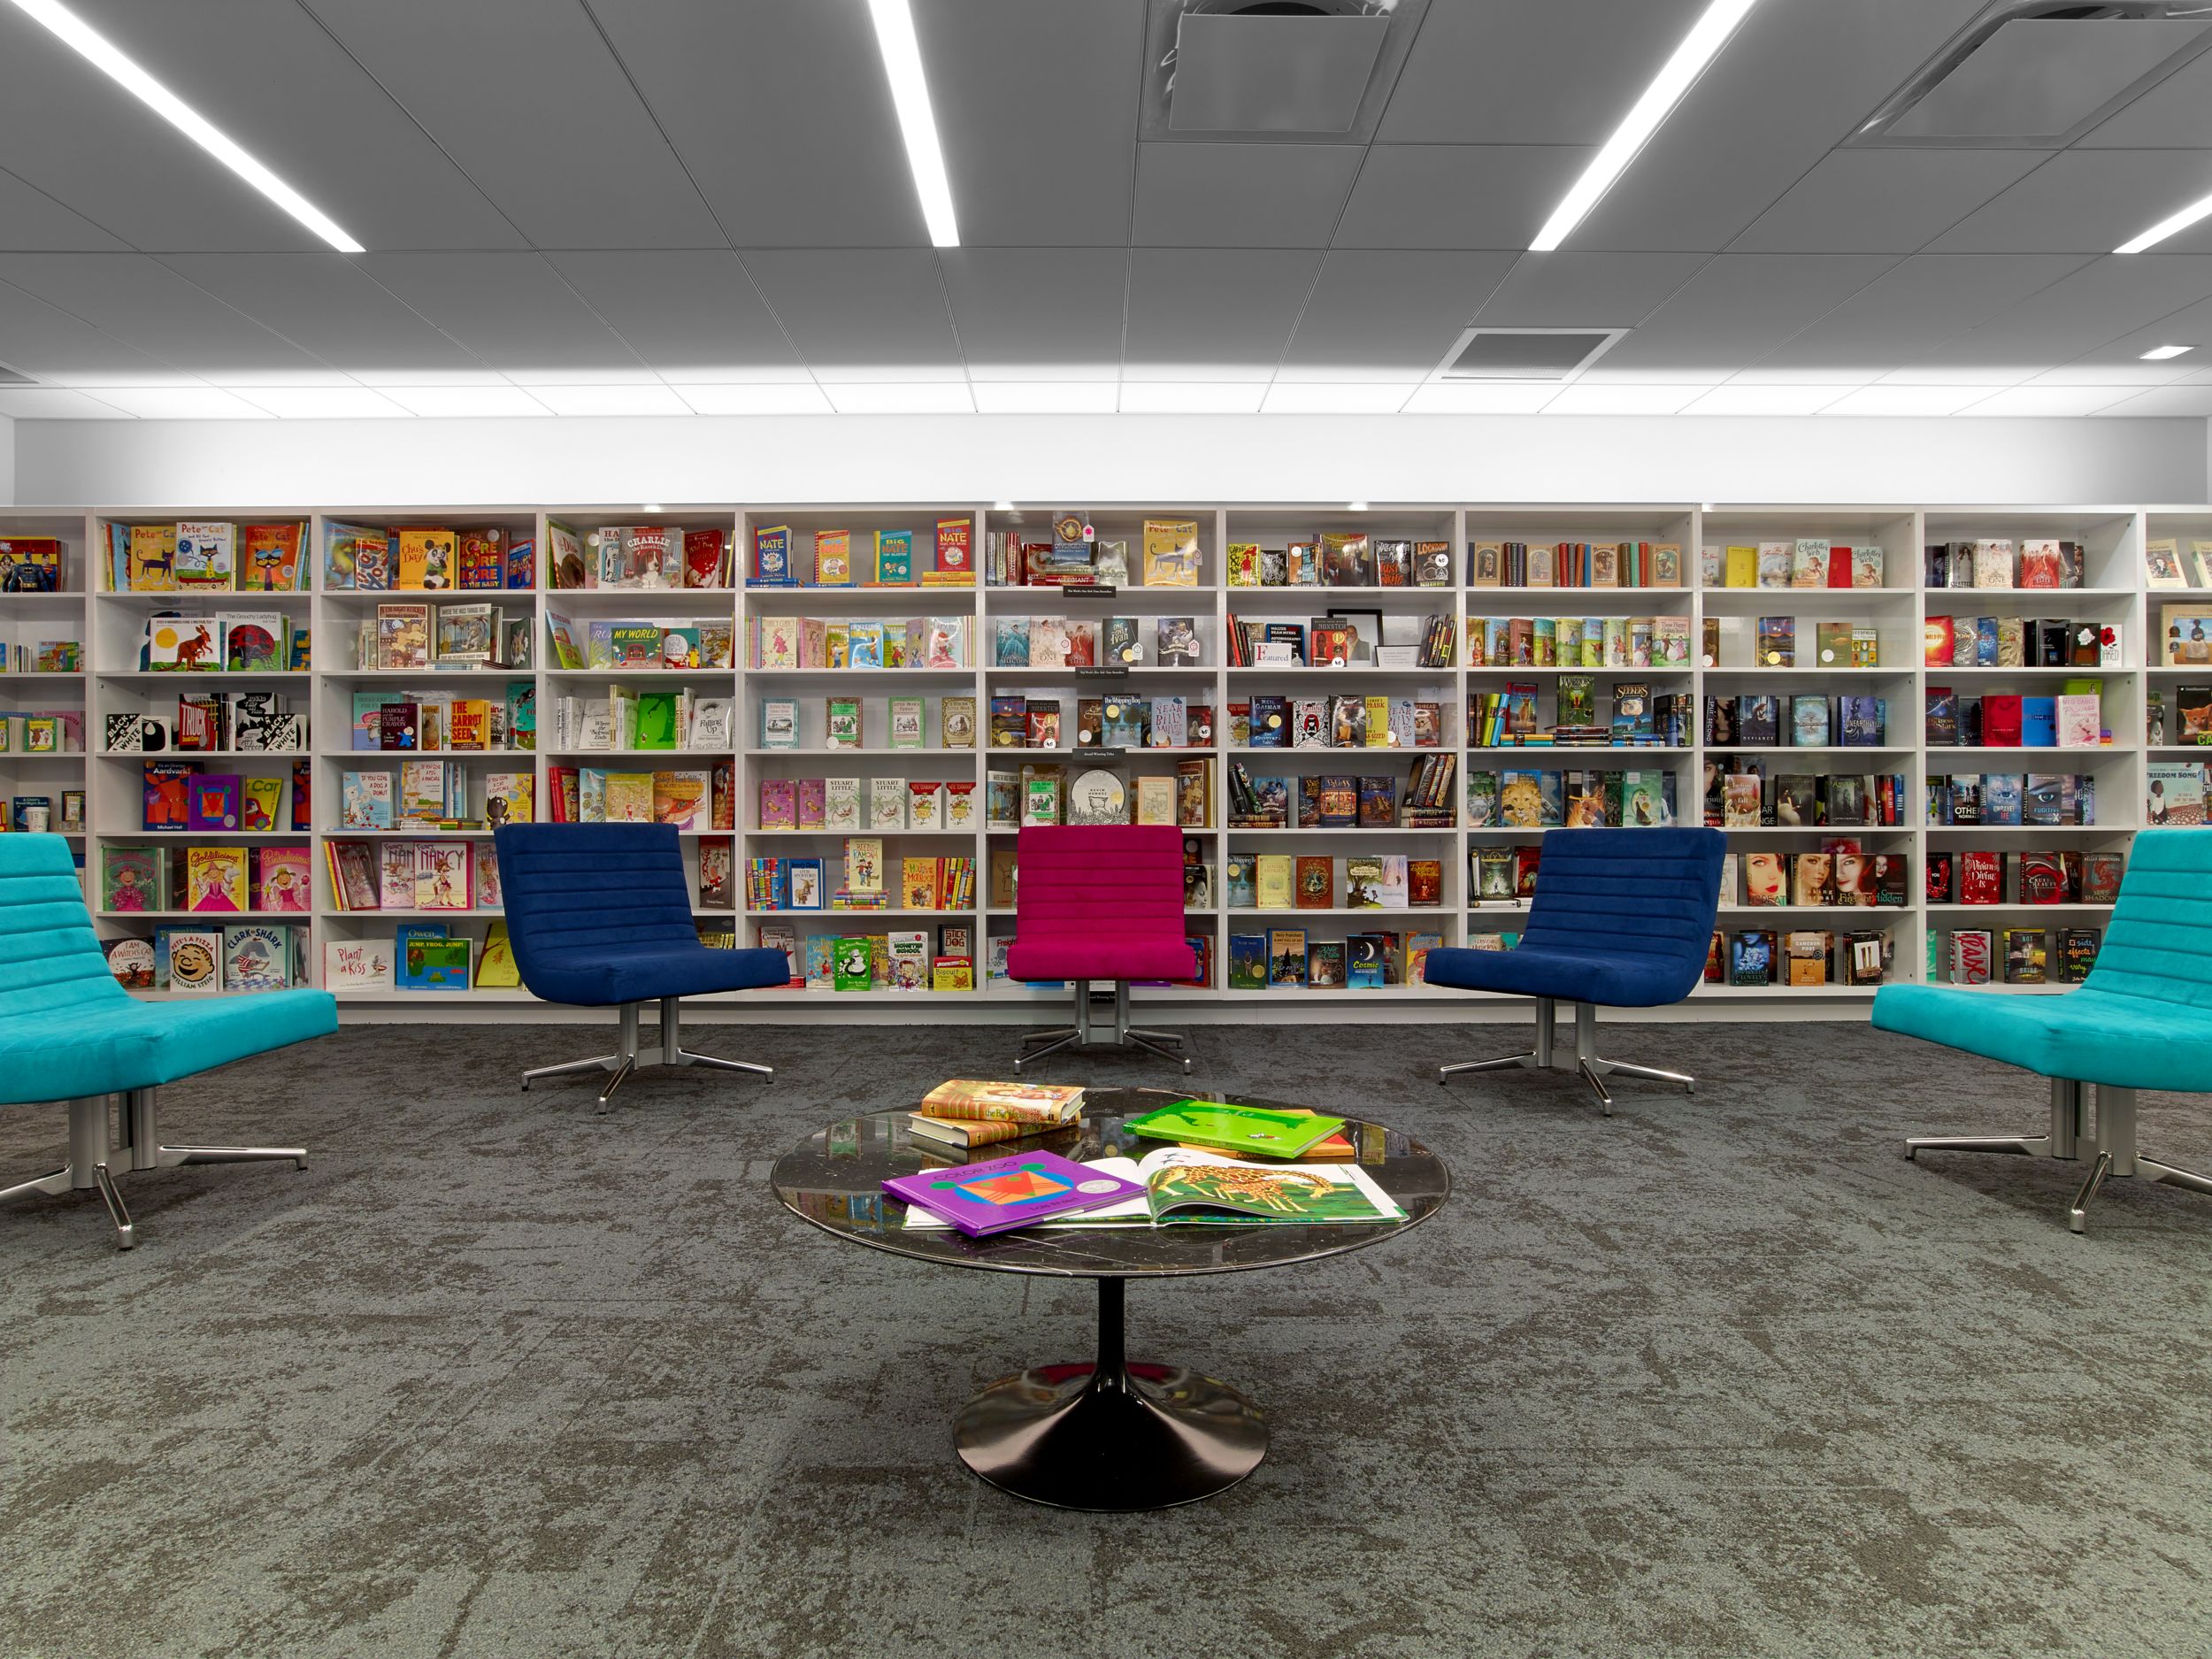 Interface B603 carpet tile in area with bookshelves and colorful chairs imagen número 3